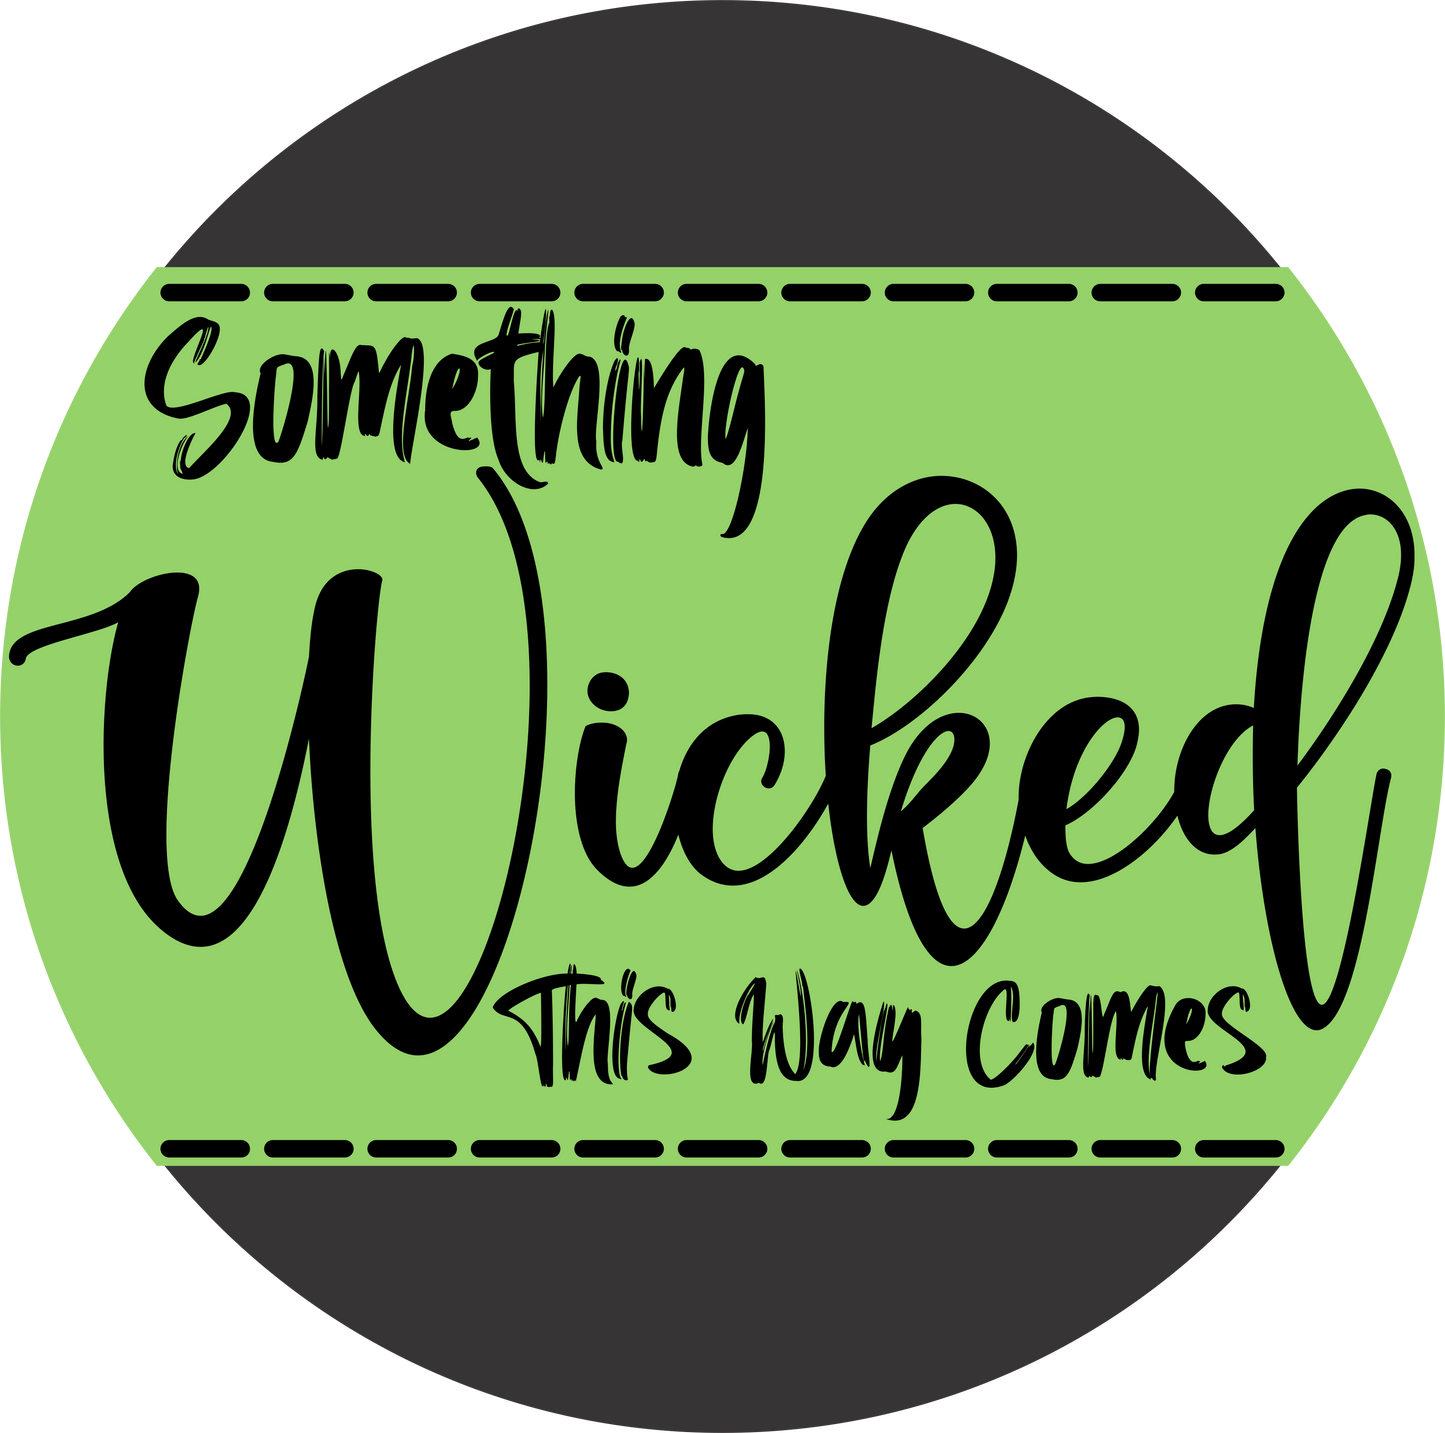 Something wicked this way comes Halloween sign